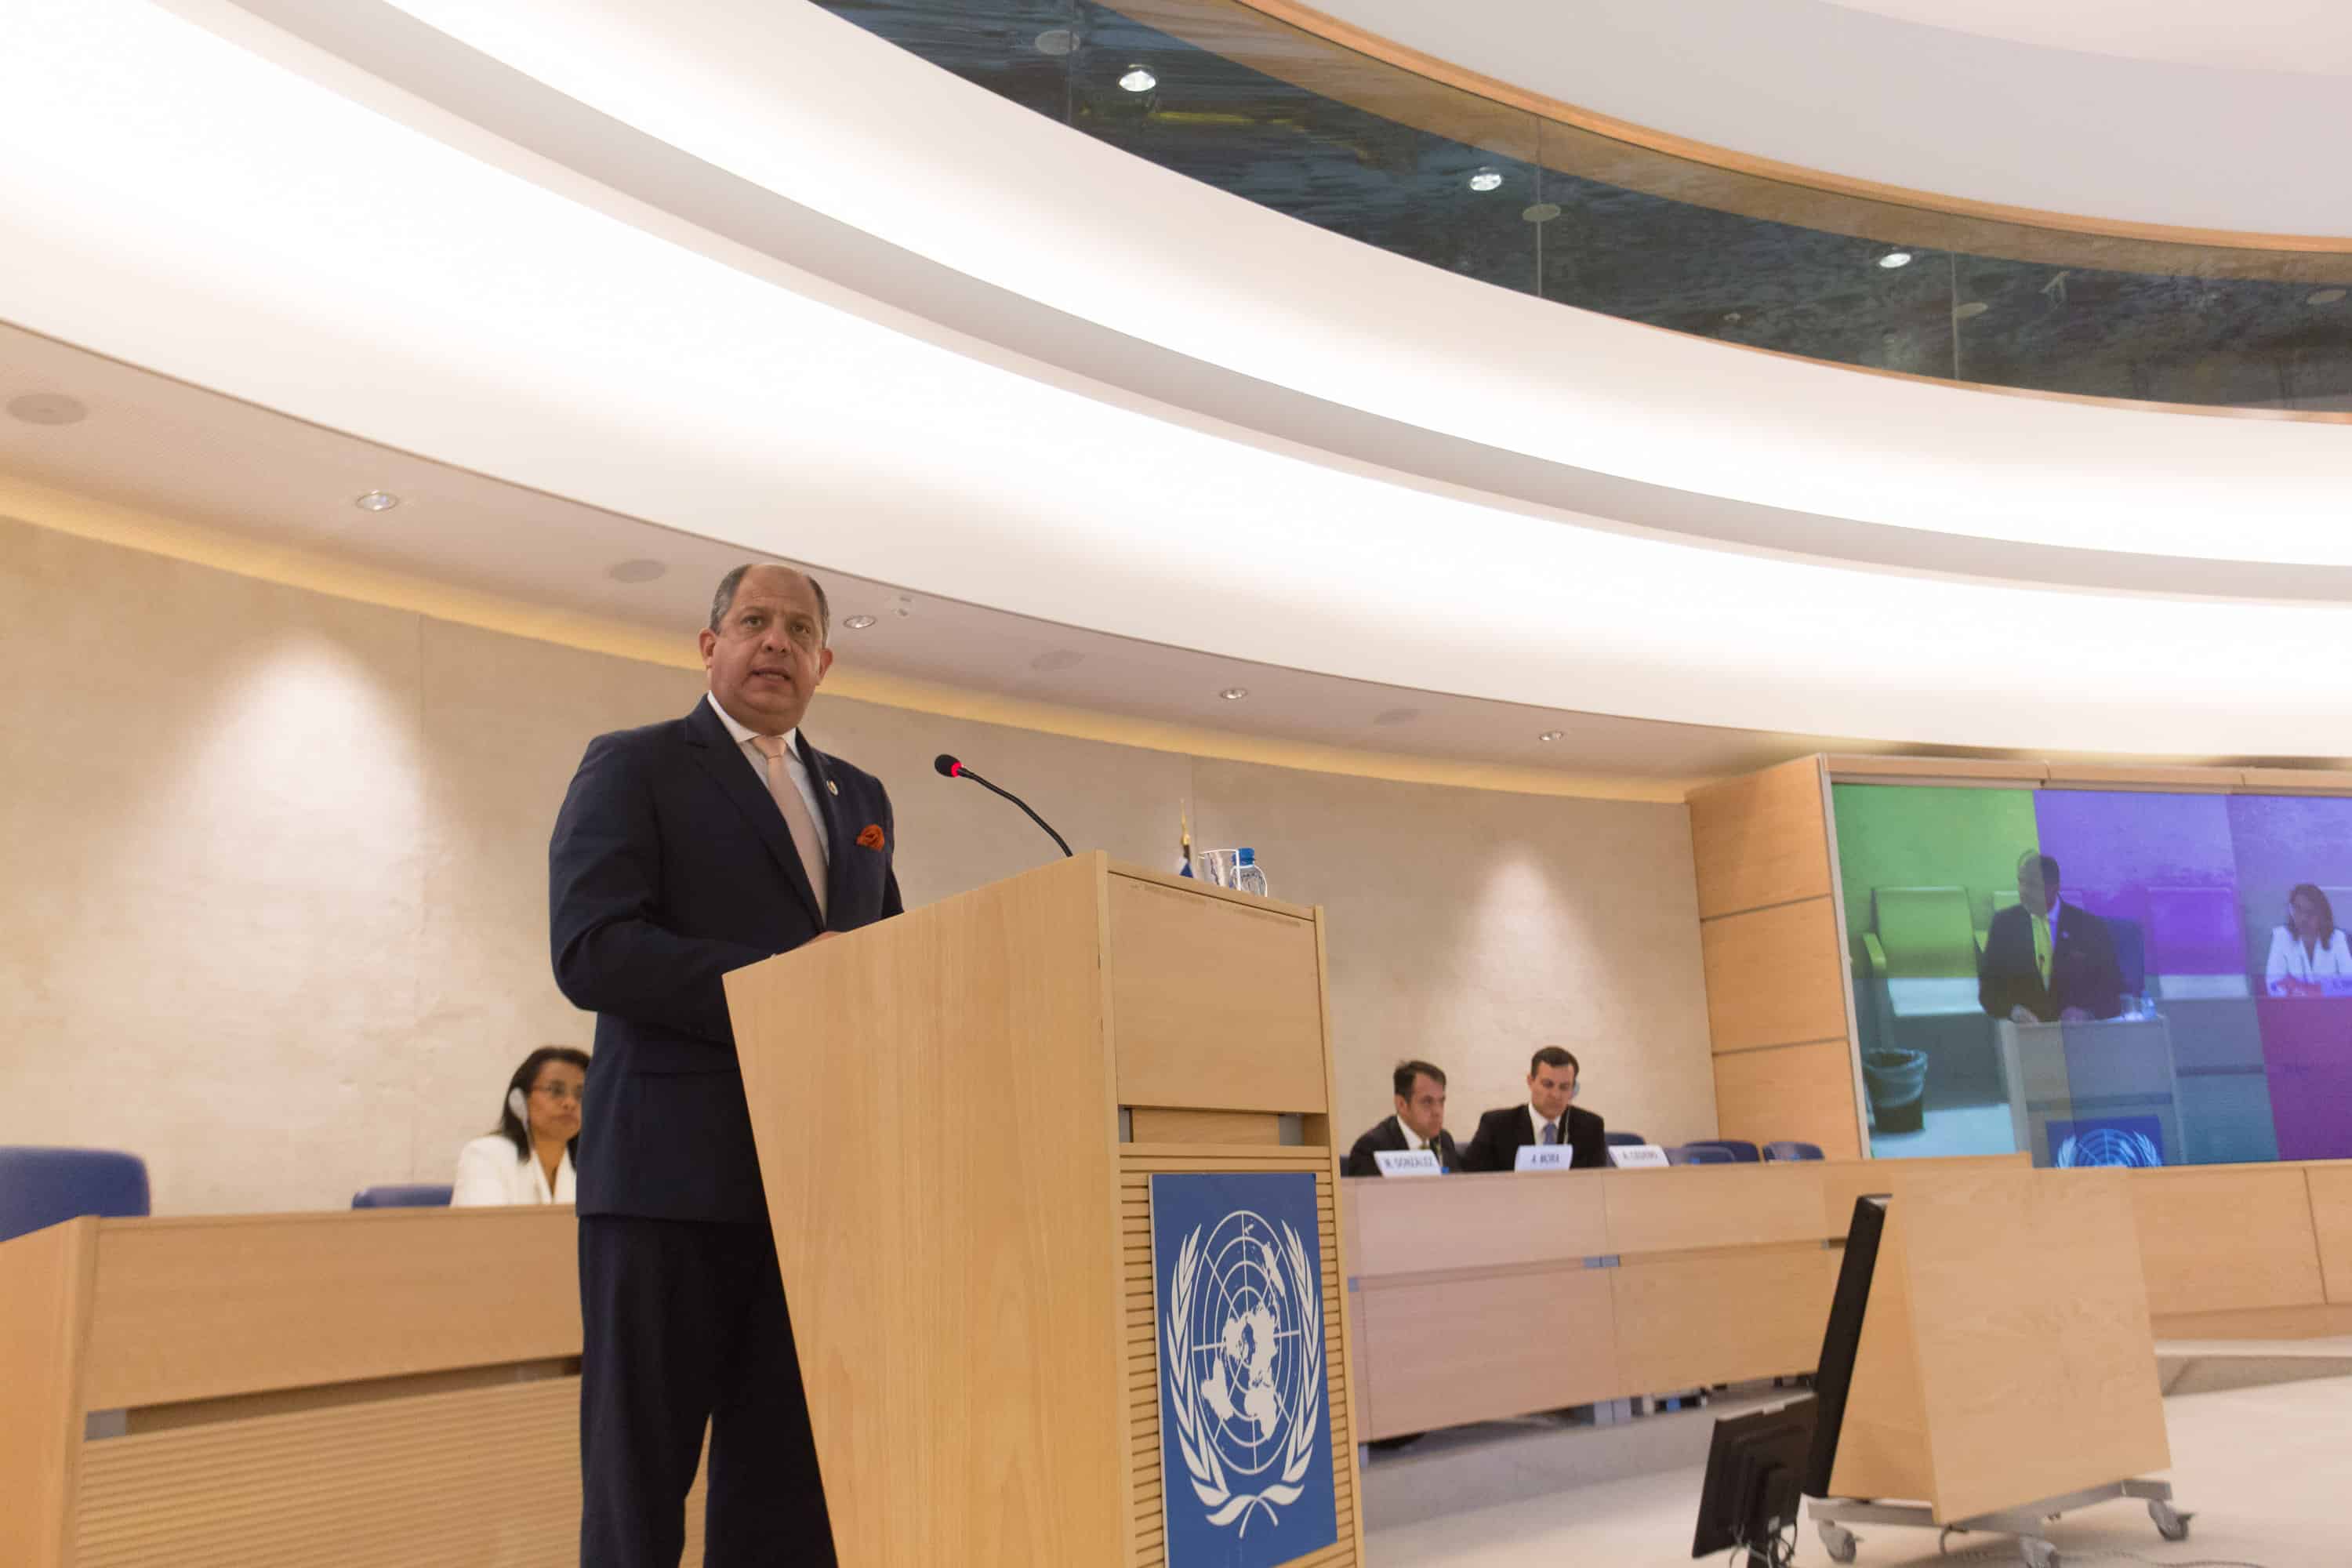 Costa Rican President Luis Guillermo Solís addresses the United Nations in Geneva.